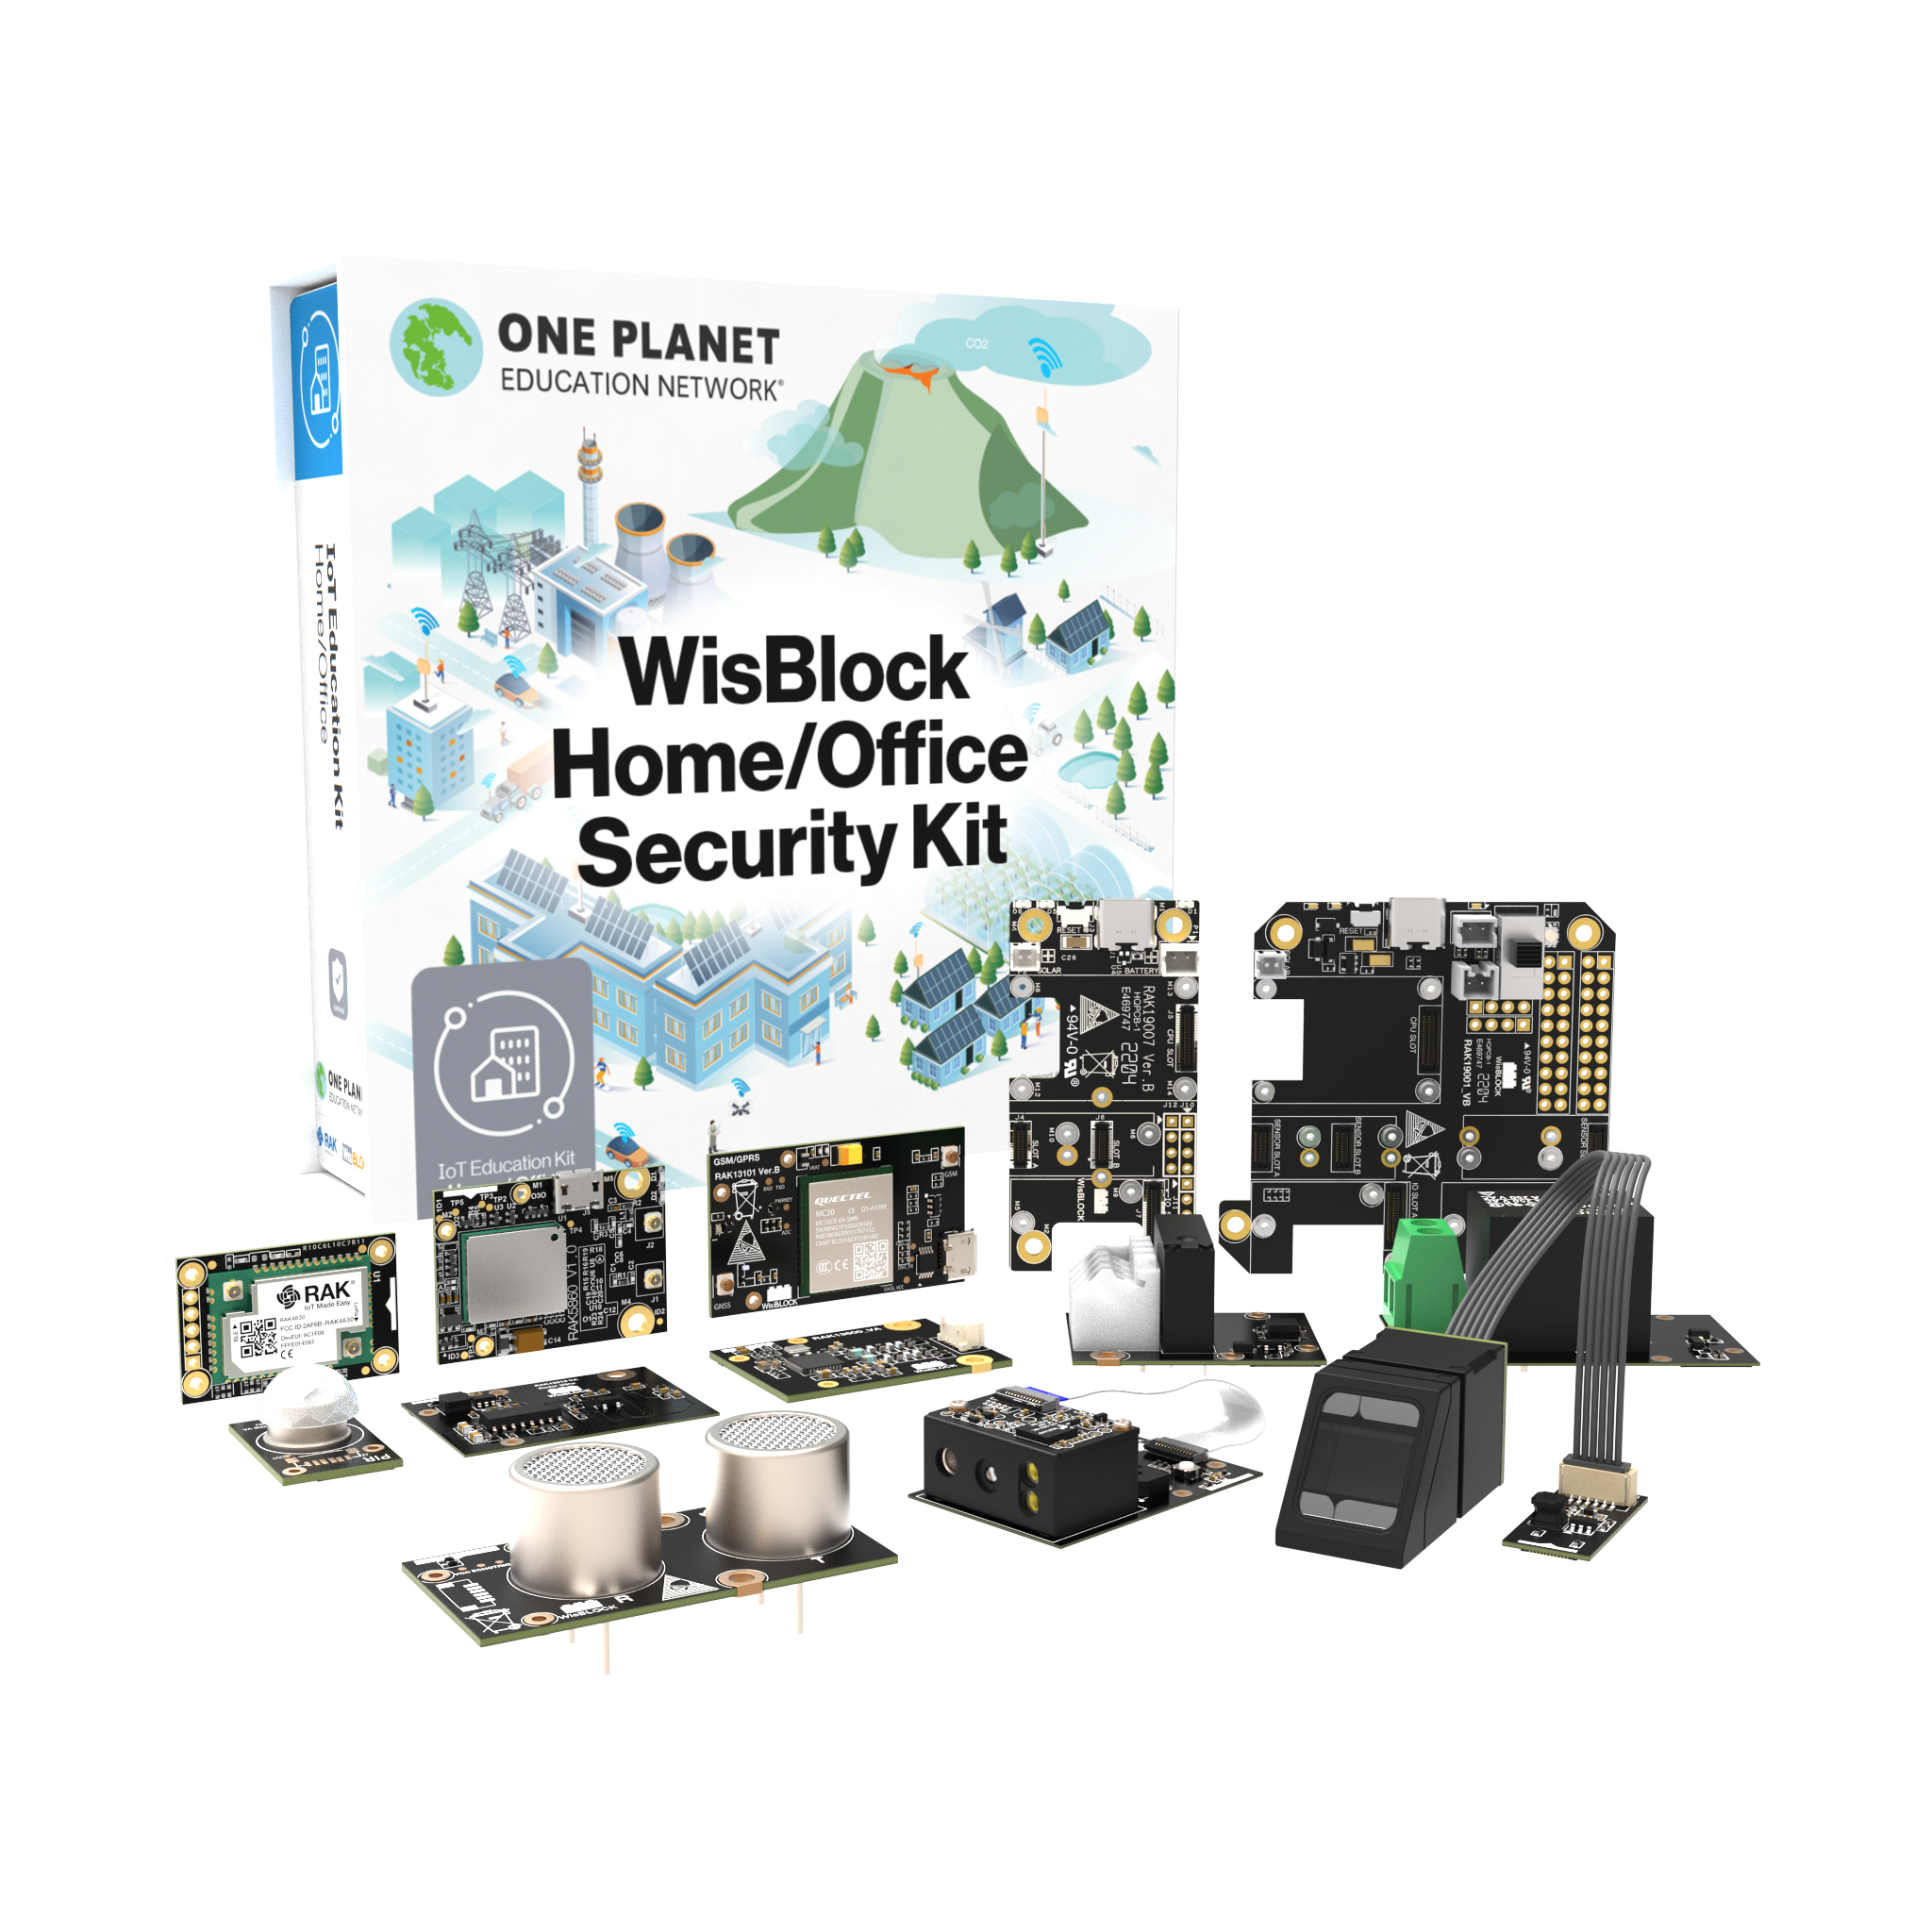 WisBlock Home/Office Security Kit